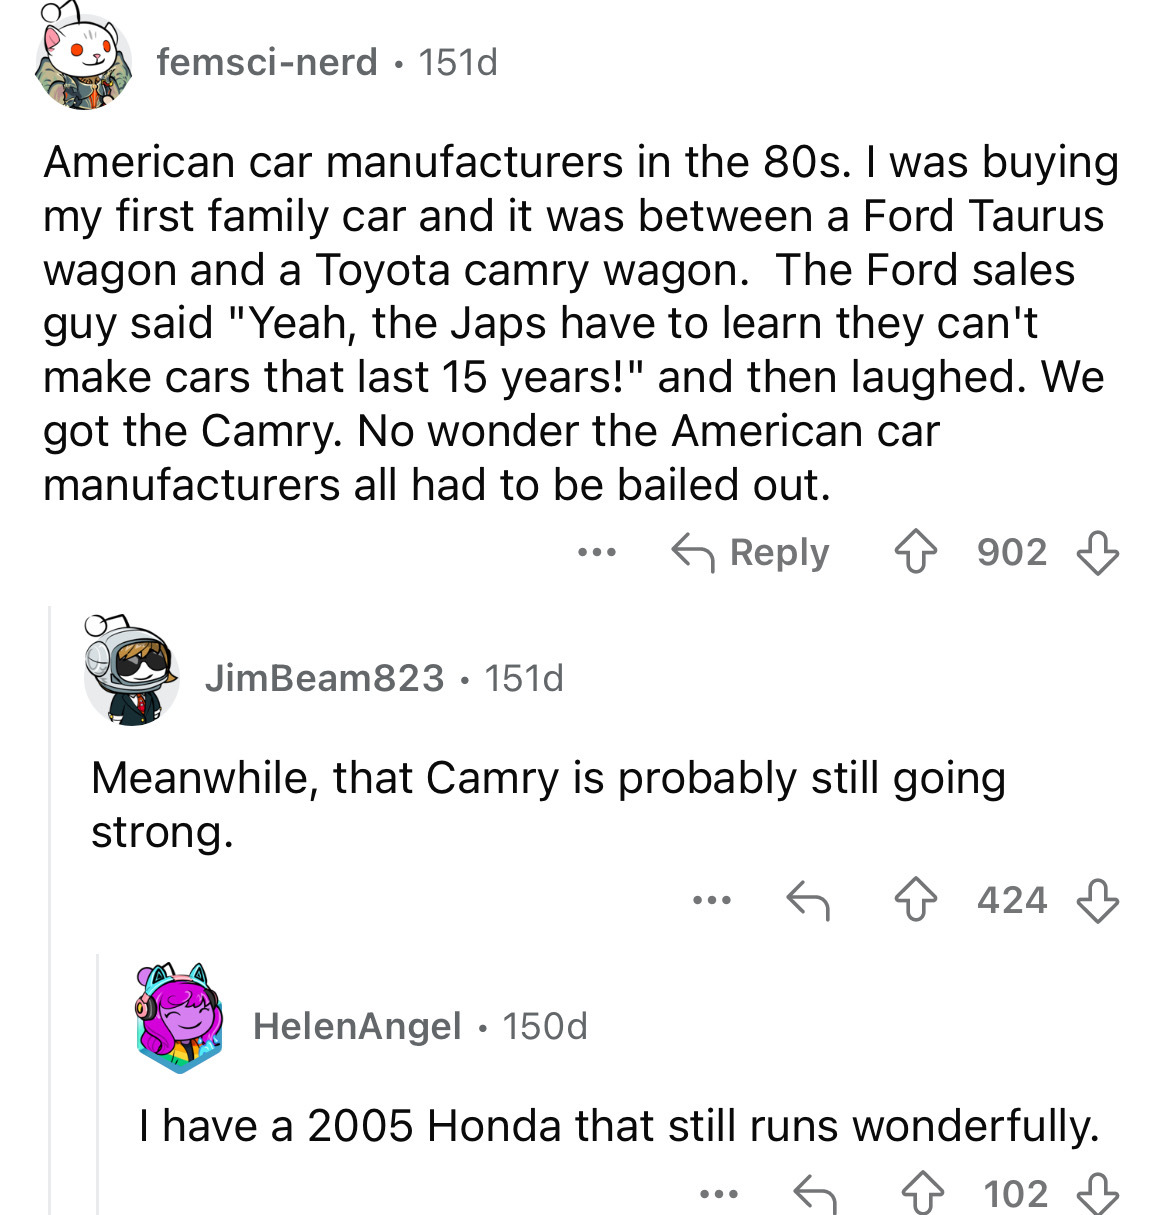 screenshot - femscinerd 151d American car manufacturers in the 80s. I was buying my first family car and it was between a Ford Taurus wagon and a Toyota camry wagon. The Ford sales guy said "Yeah, the Japs have to learn they can't make cars that last 15 y